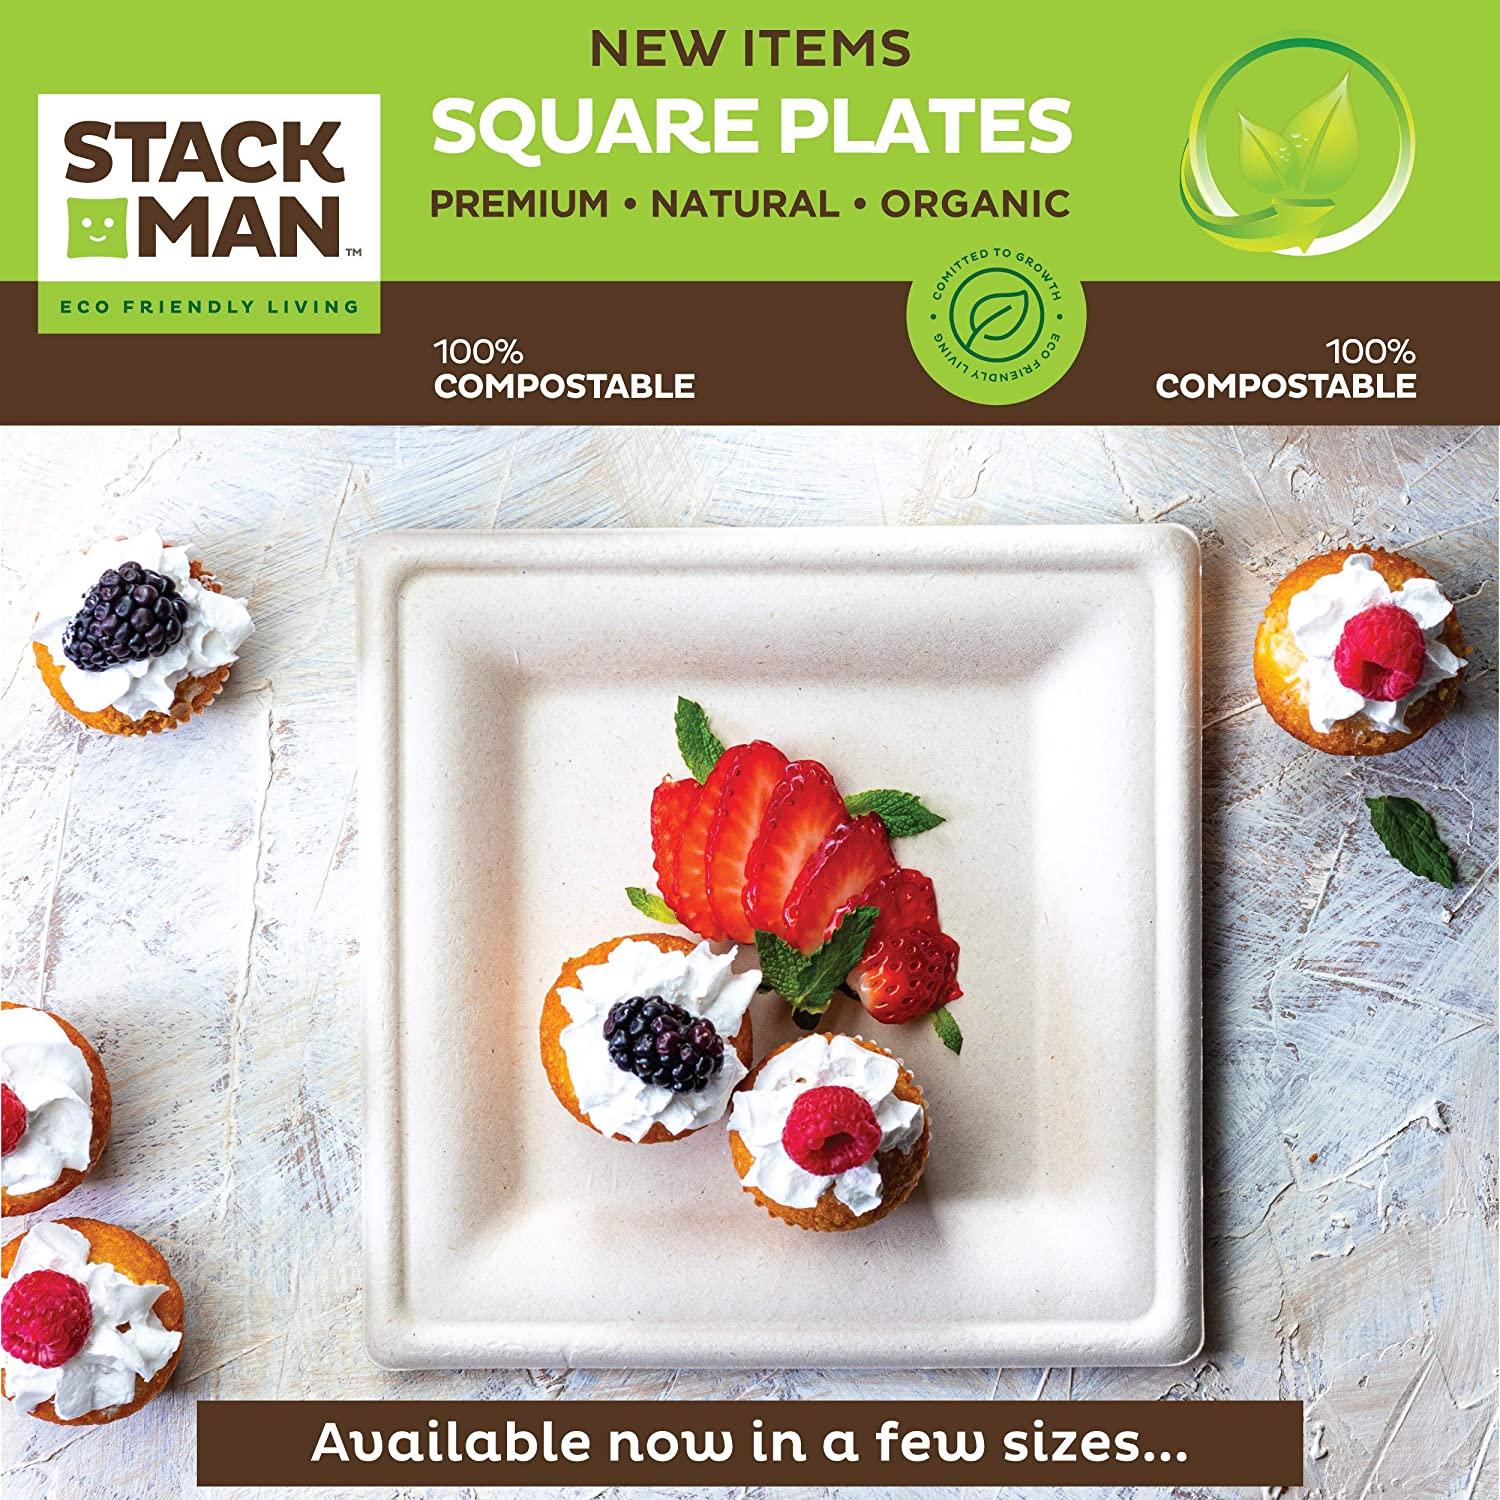 Eco Friendly Oval Compostable Plates